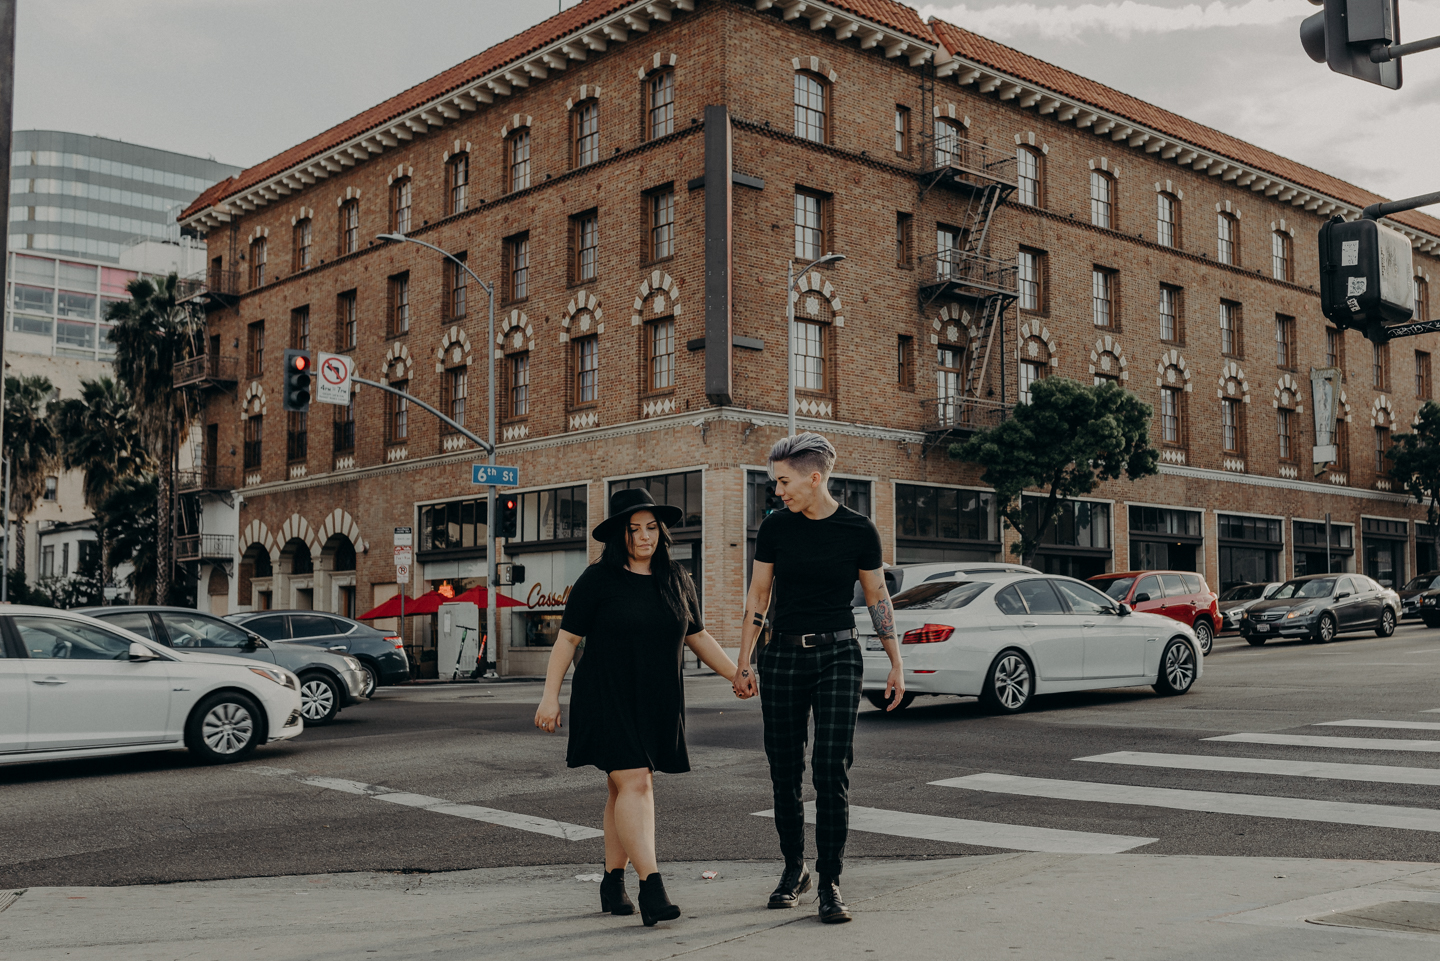 queer wedding photographer in los angeles - lesbian engagement session los angeles - isaiahandtaylor.com-011.jpg